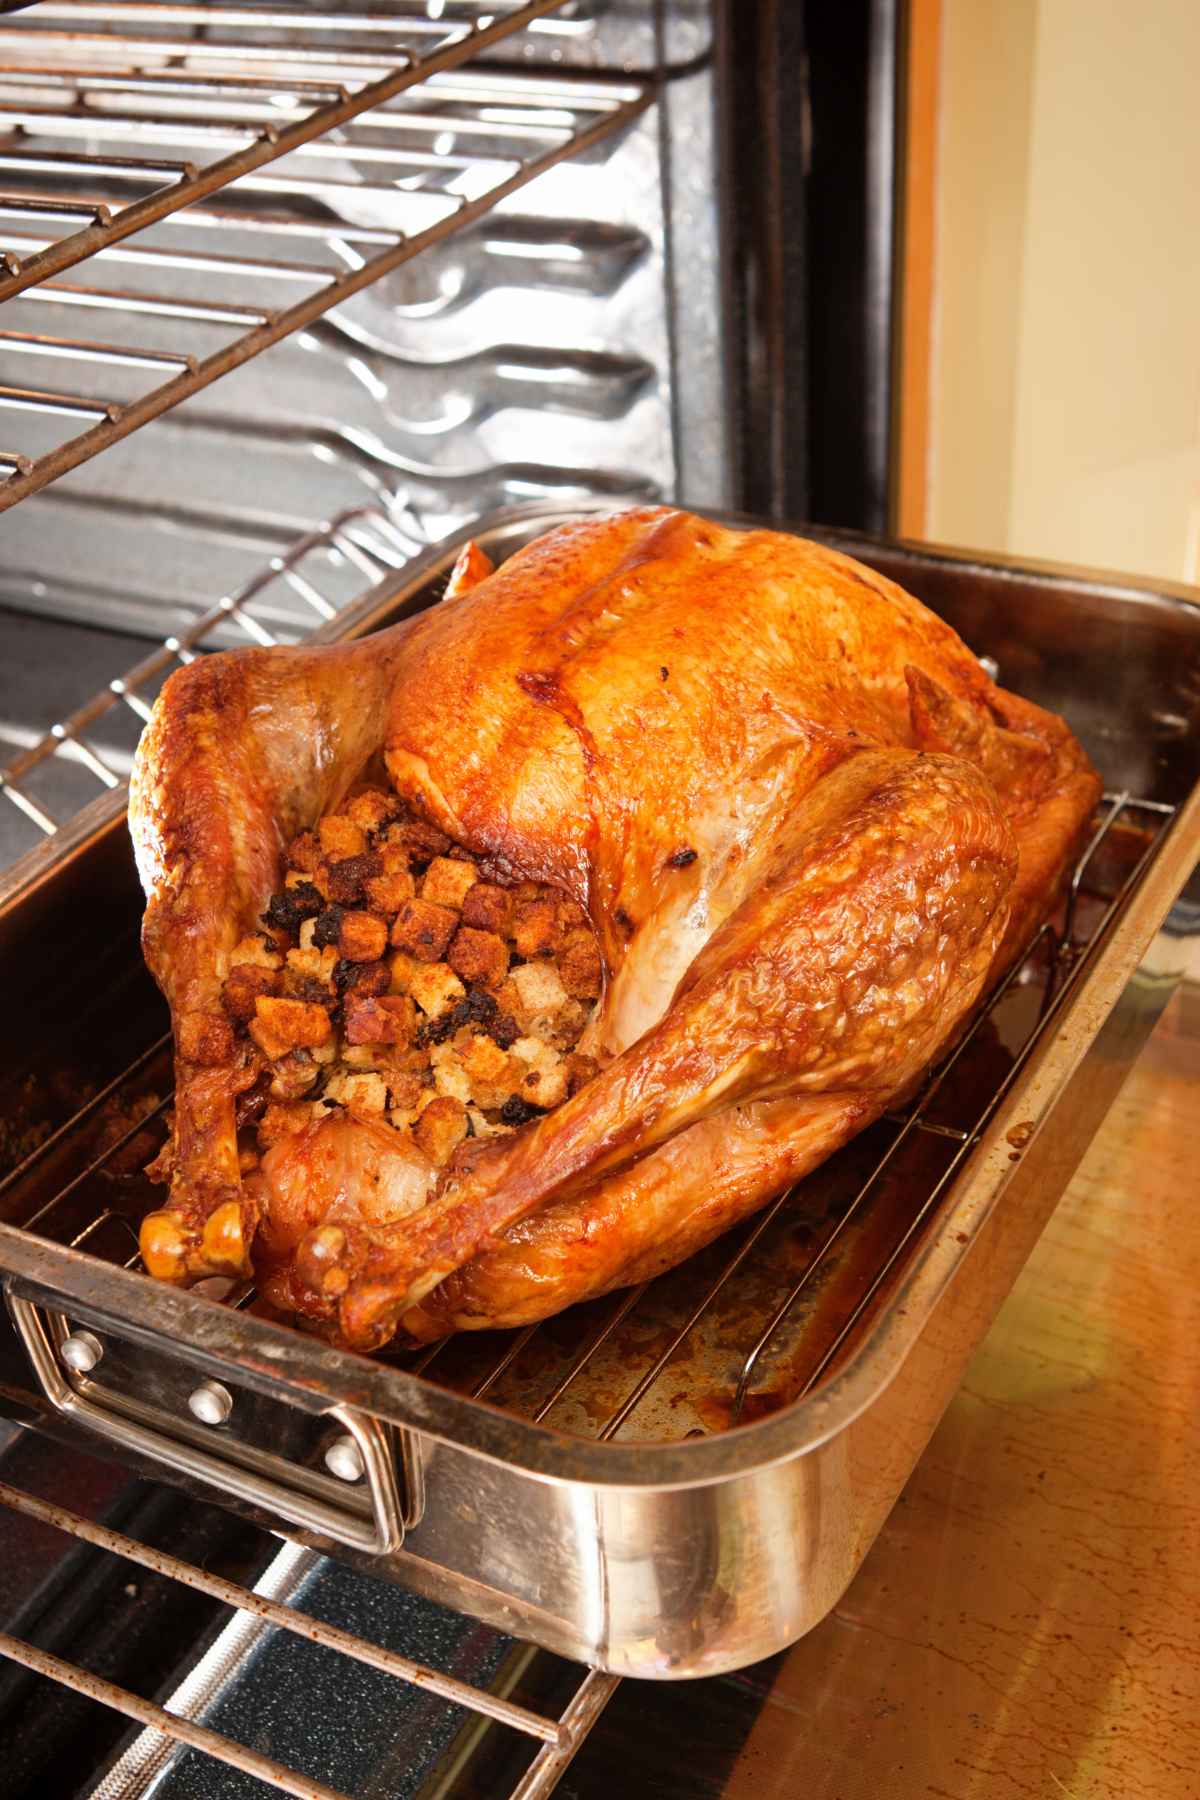 Ever wonder what’s the best Oven Temp for Turkey to get the perfectly moist and juicy meat for your Thanksgiving dinner? We’ve got you covered with how to roast turkey with different oven temperatures, how long to bake it, how to check the internal temp, and how to tell when it’s done cooking.